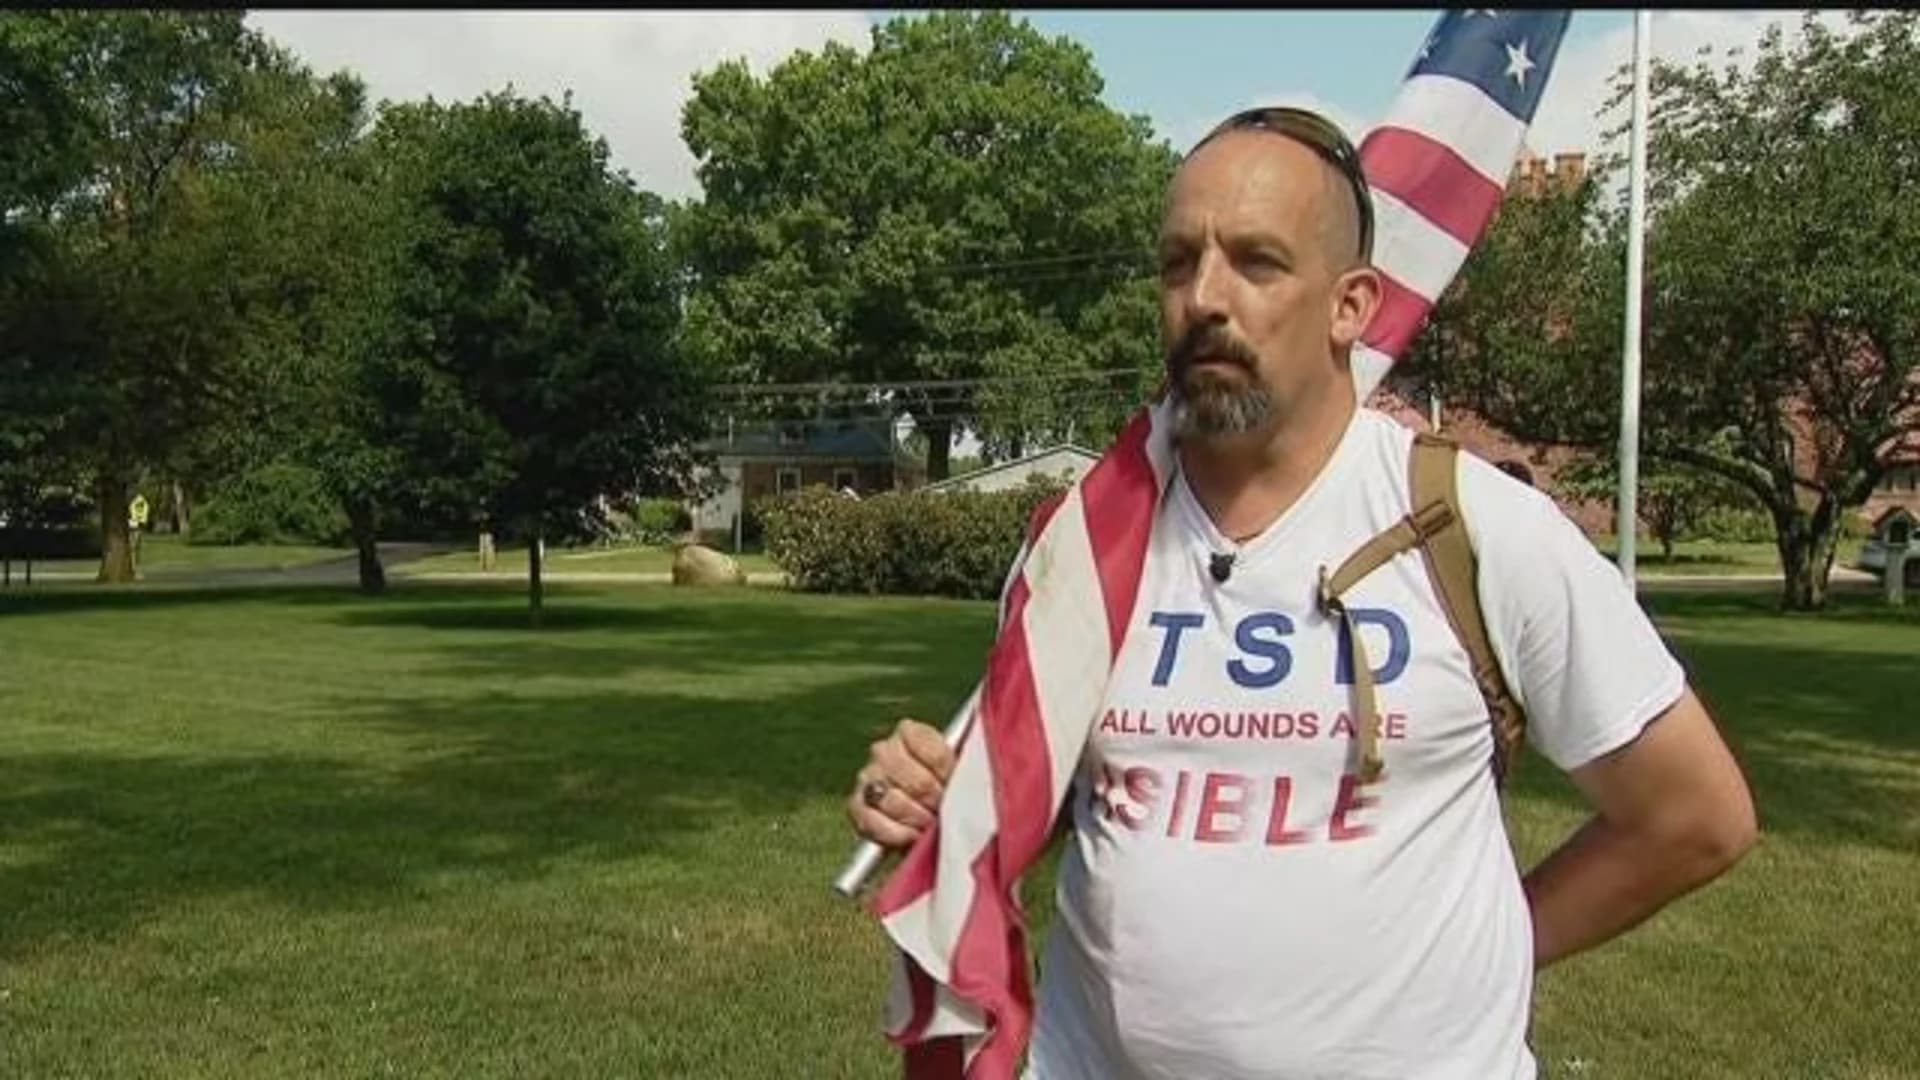 Disabled Army vet walks across Connecticut to raise awareness for veterans' issues